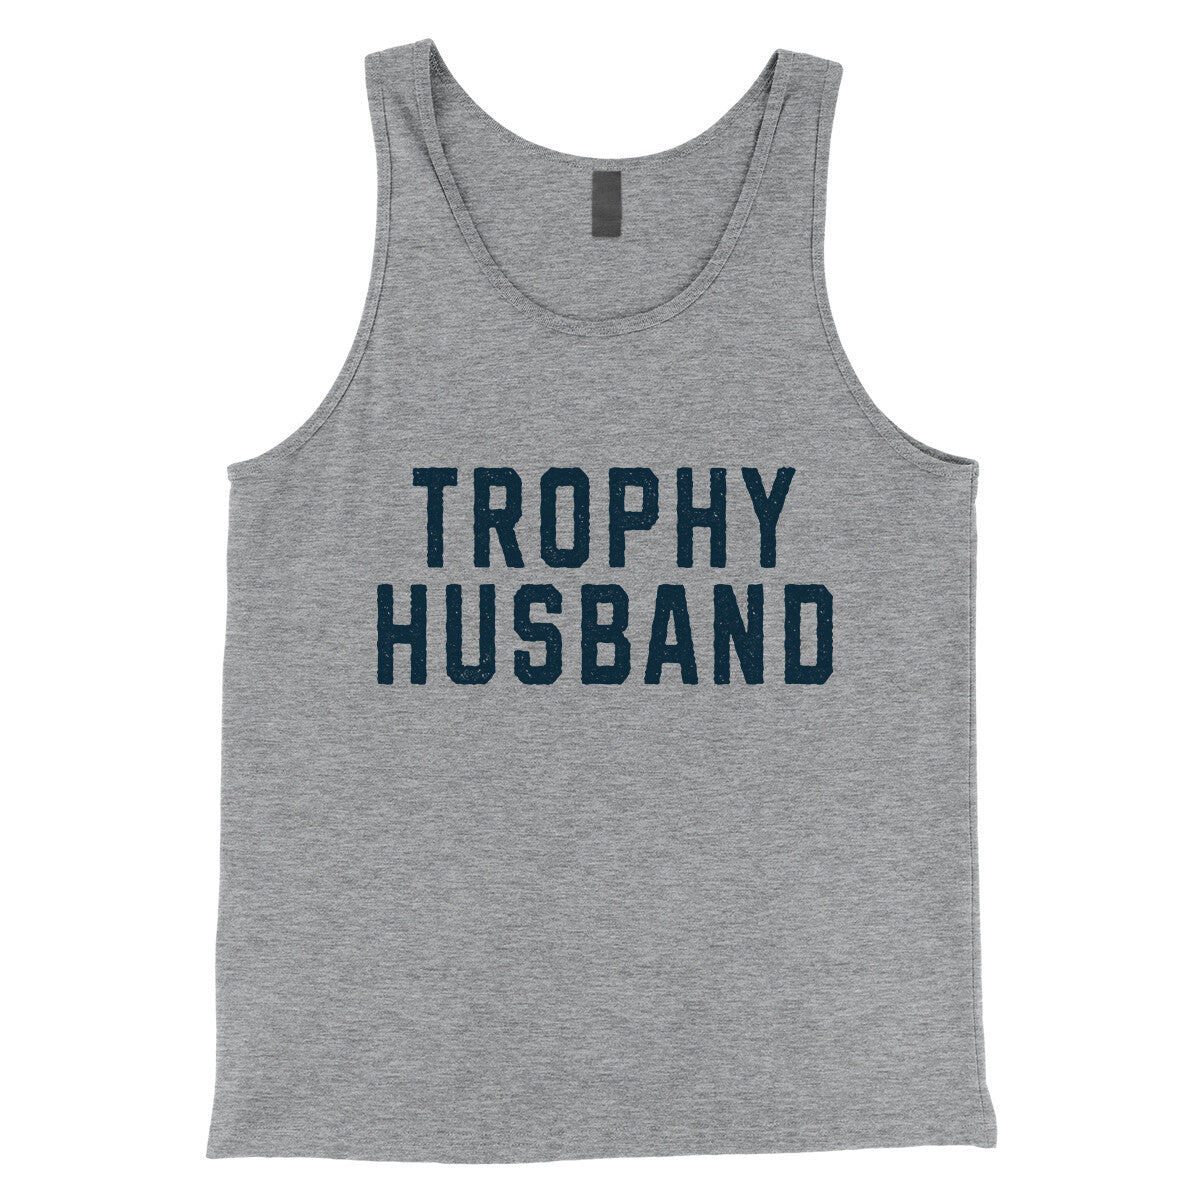 Trophy Husband in Athletic Heather Color